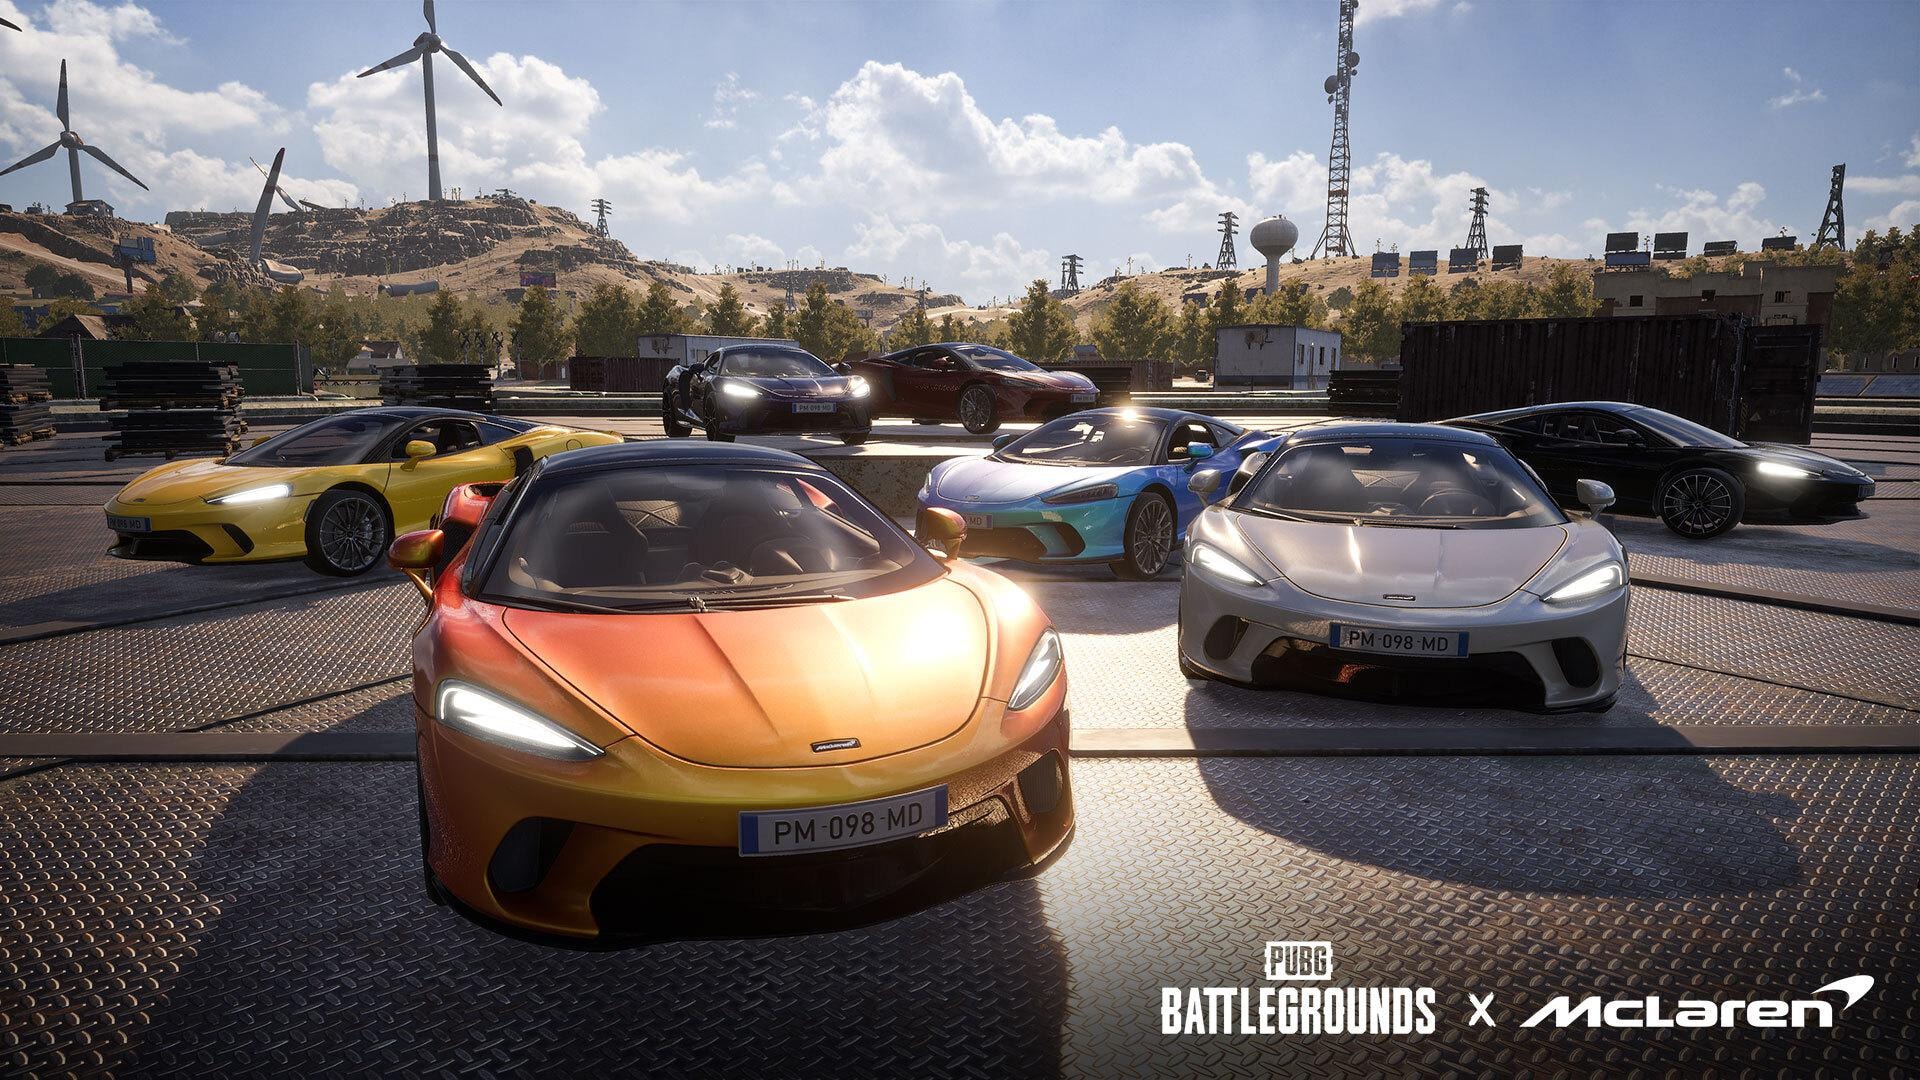 pubg-battlegrounds-collaborates-with-mclaren-to-bring-new-vehicles-in-game